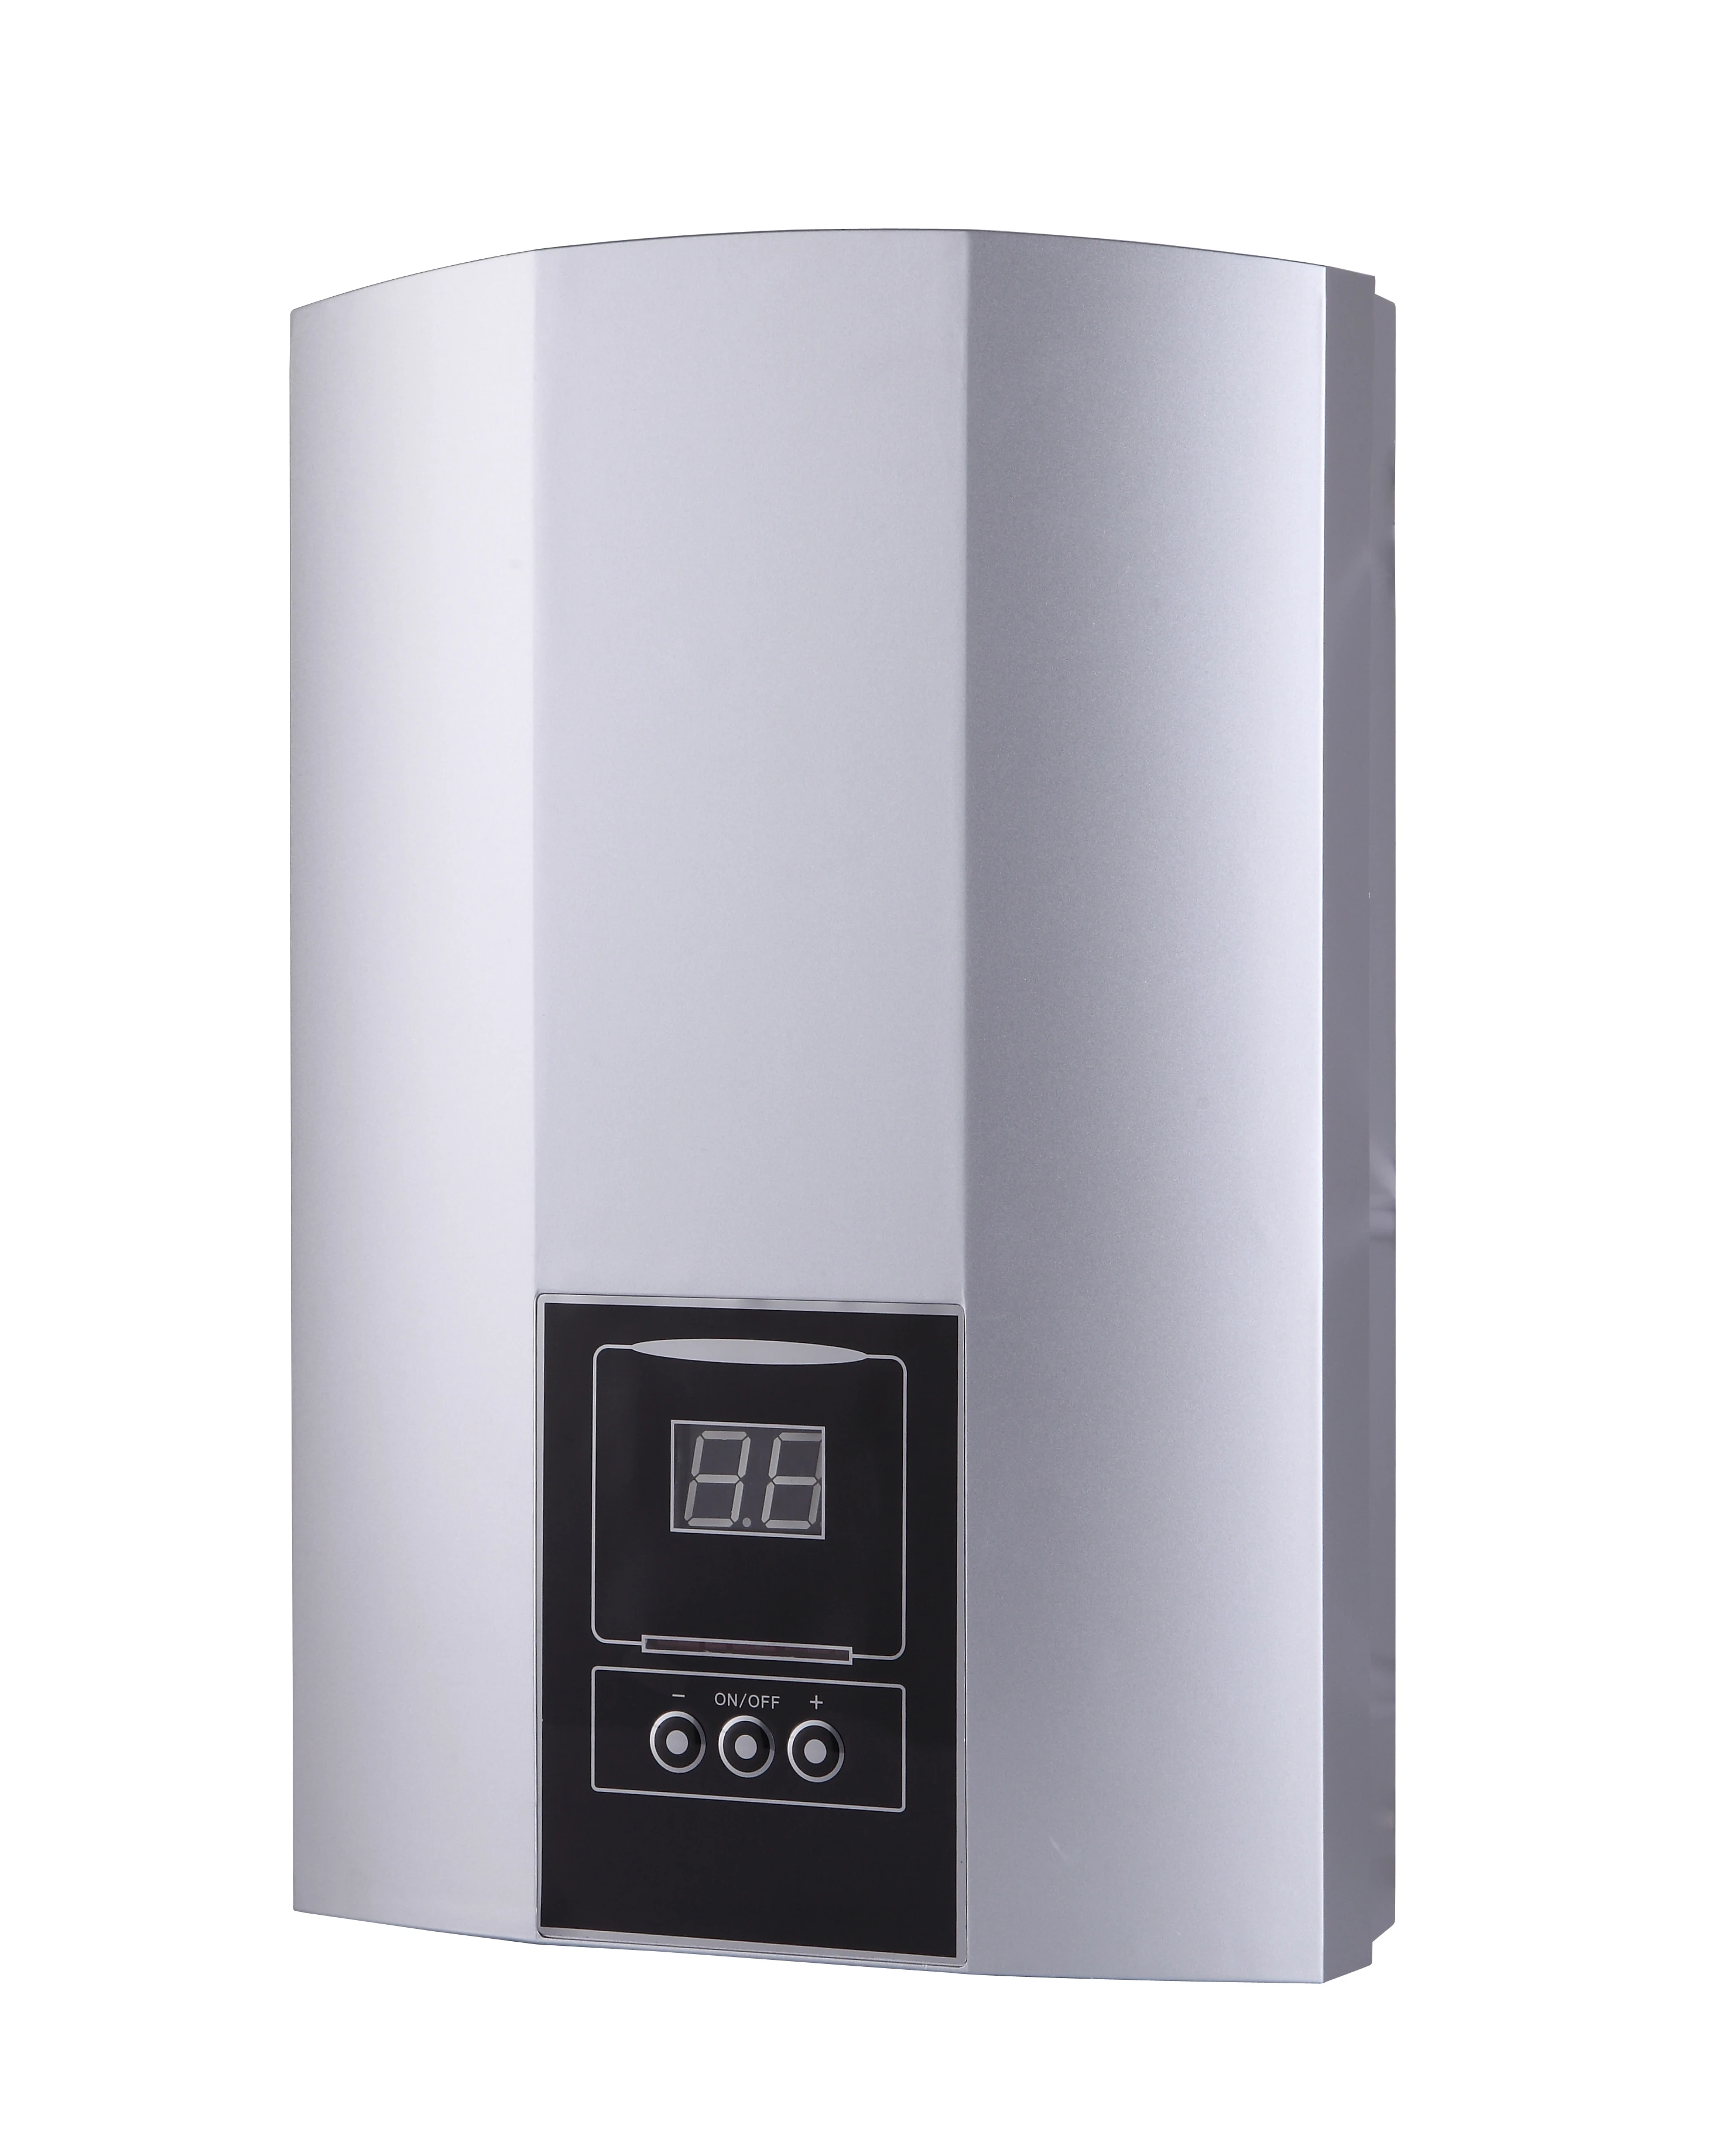 6-8KW tankless instant electric water heater for shower